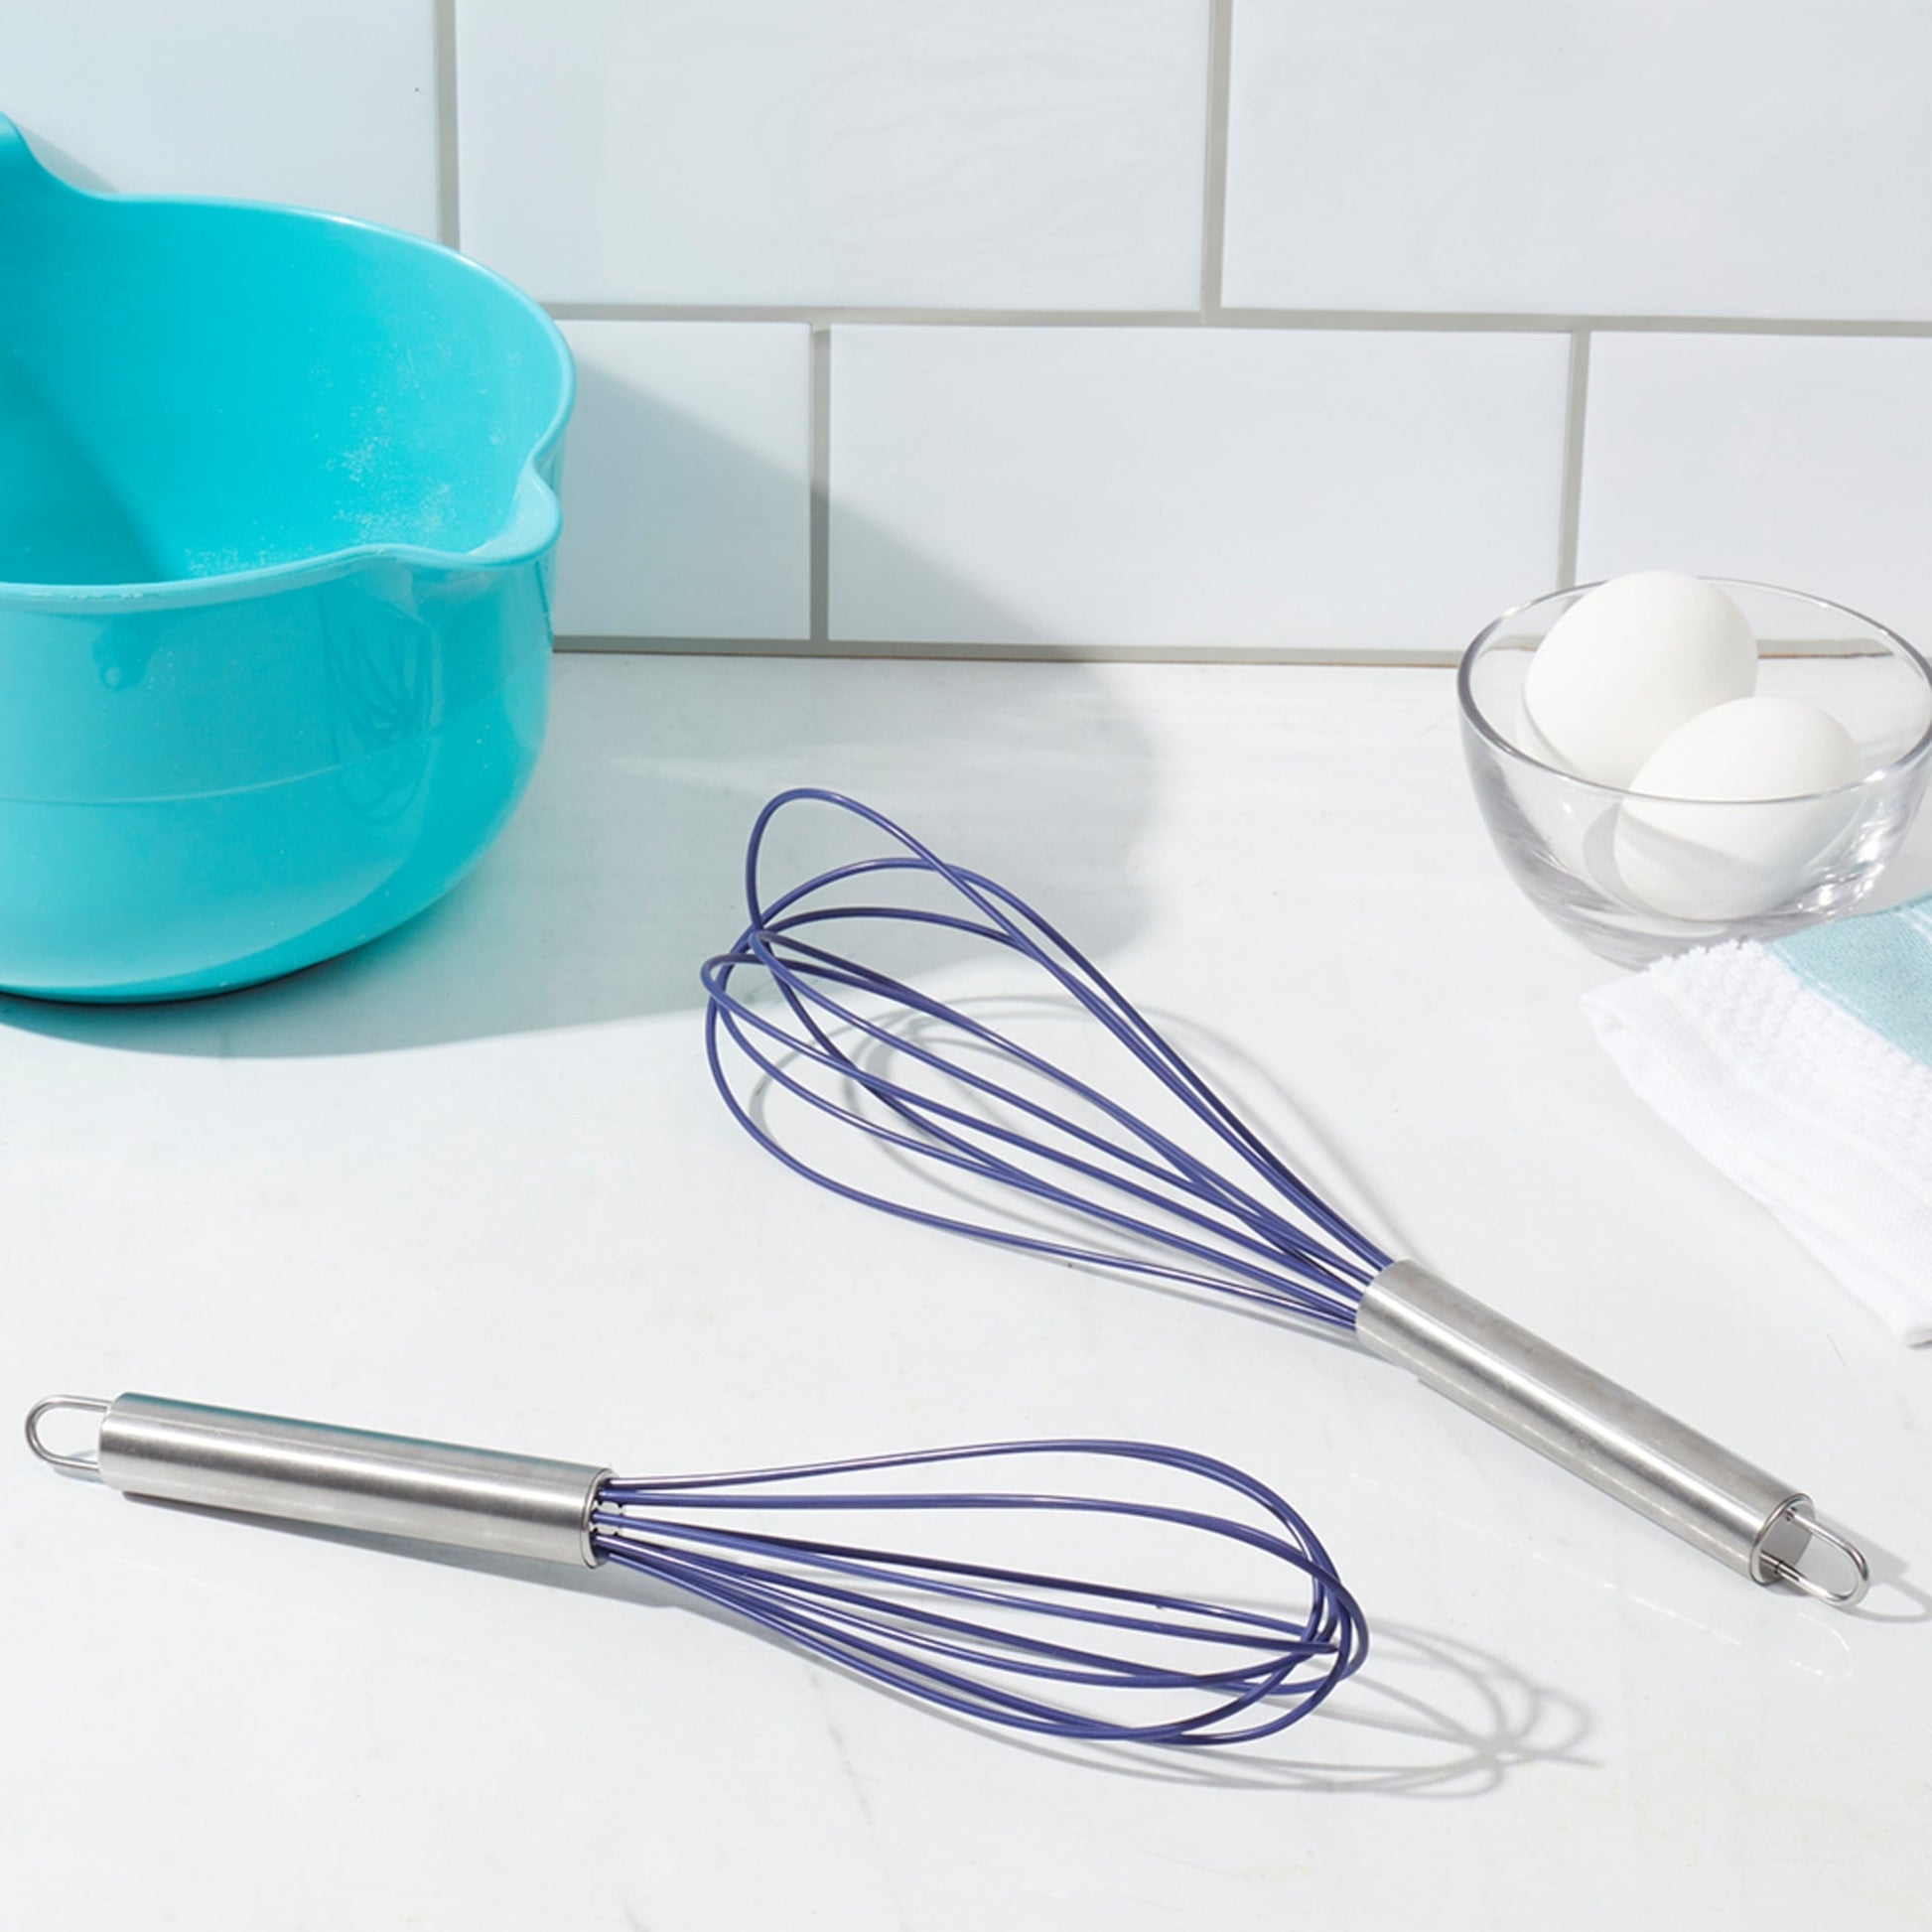 Balloon Whisk - Stainless Steel Handle